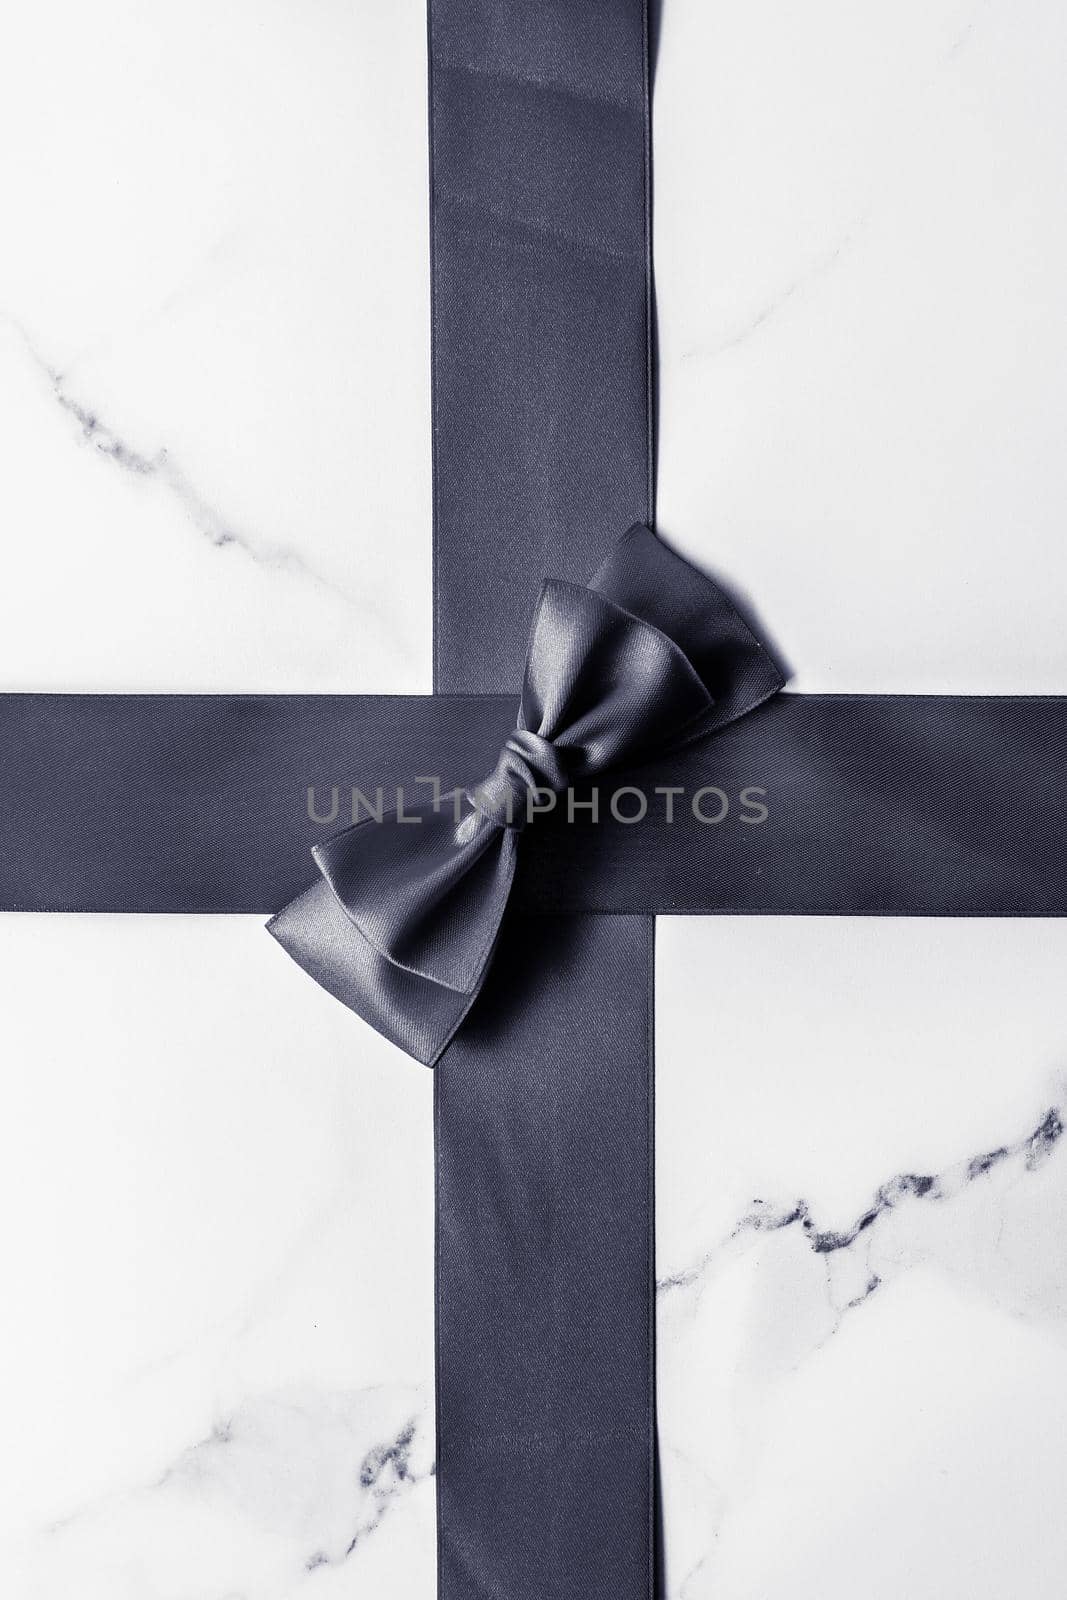 Black silk ribbon and bow on marble background, flatlay by Anneleven